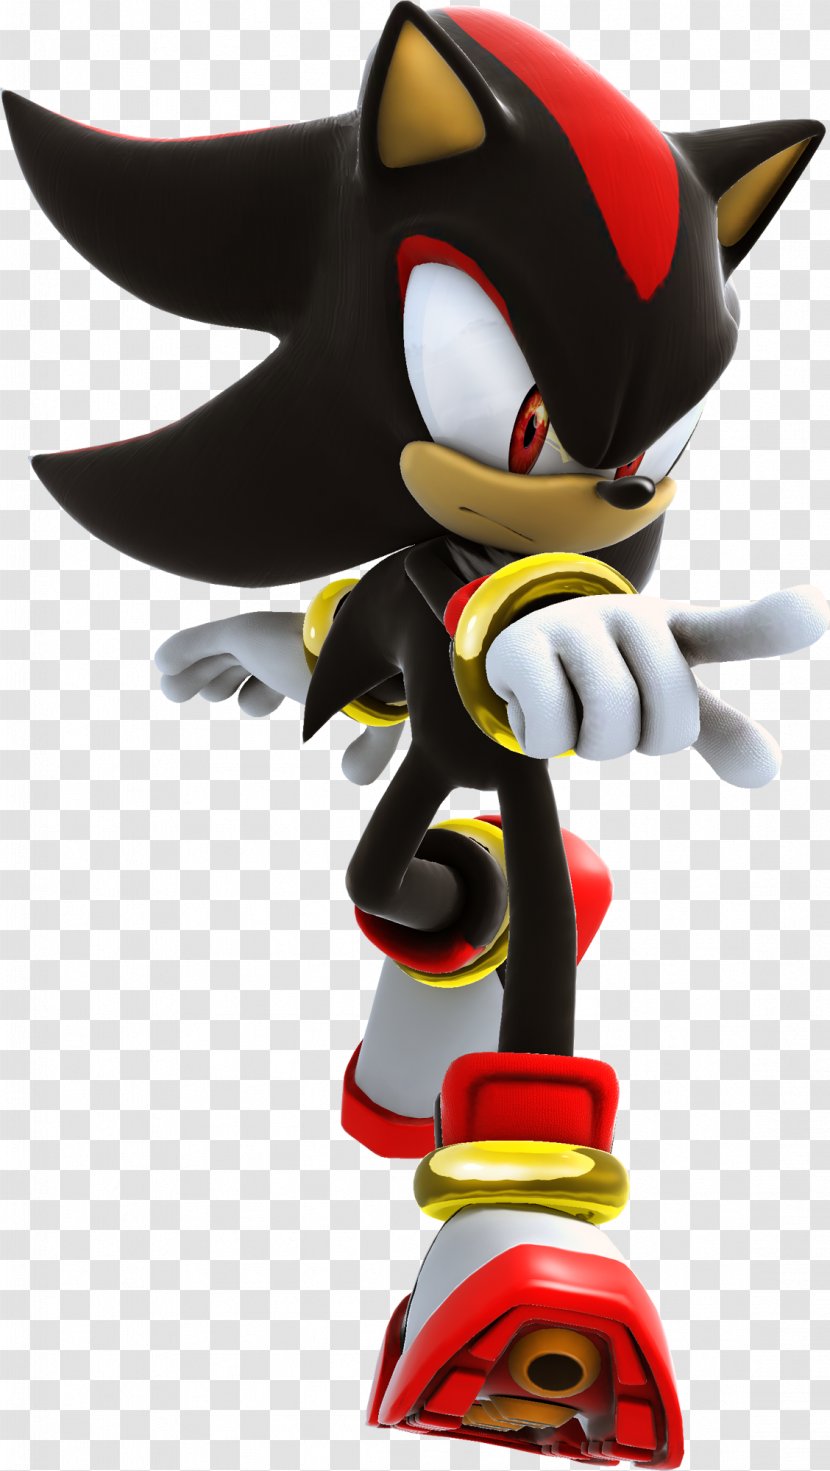 Shadow The Hedgehog Sonic & Knuckles Mario At Olympic Games Adventure 2 - Fictional Character Transparent PNG